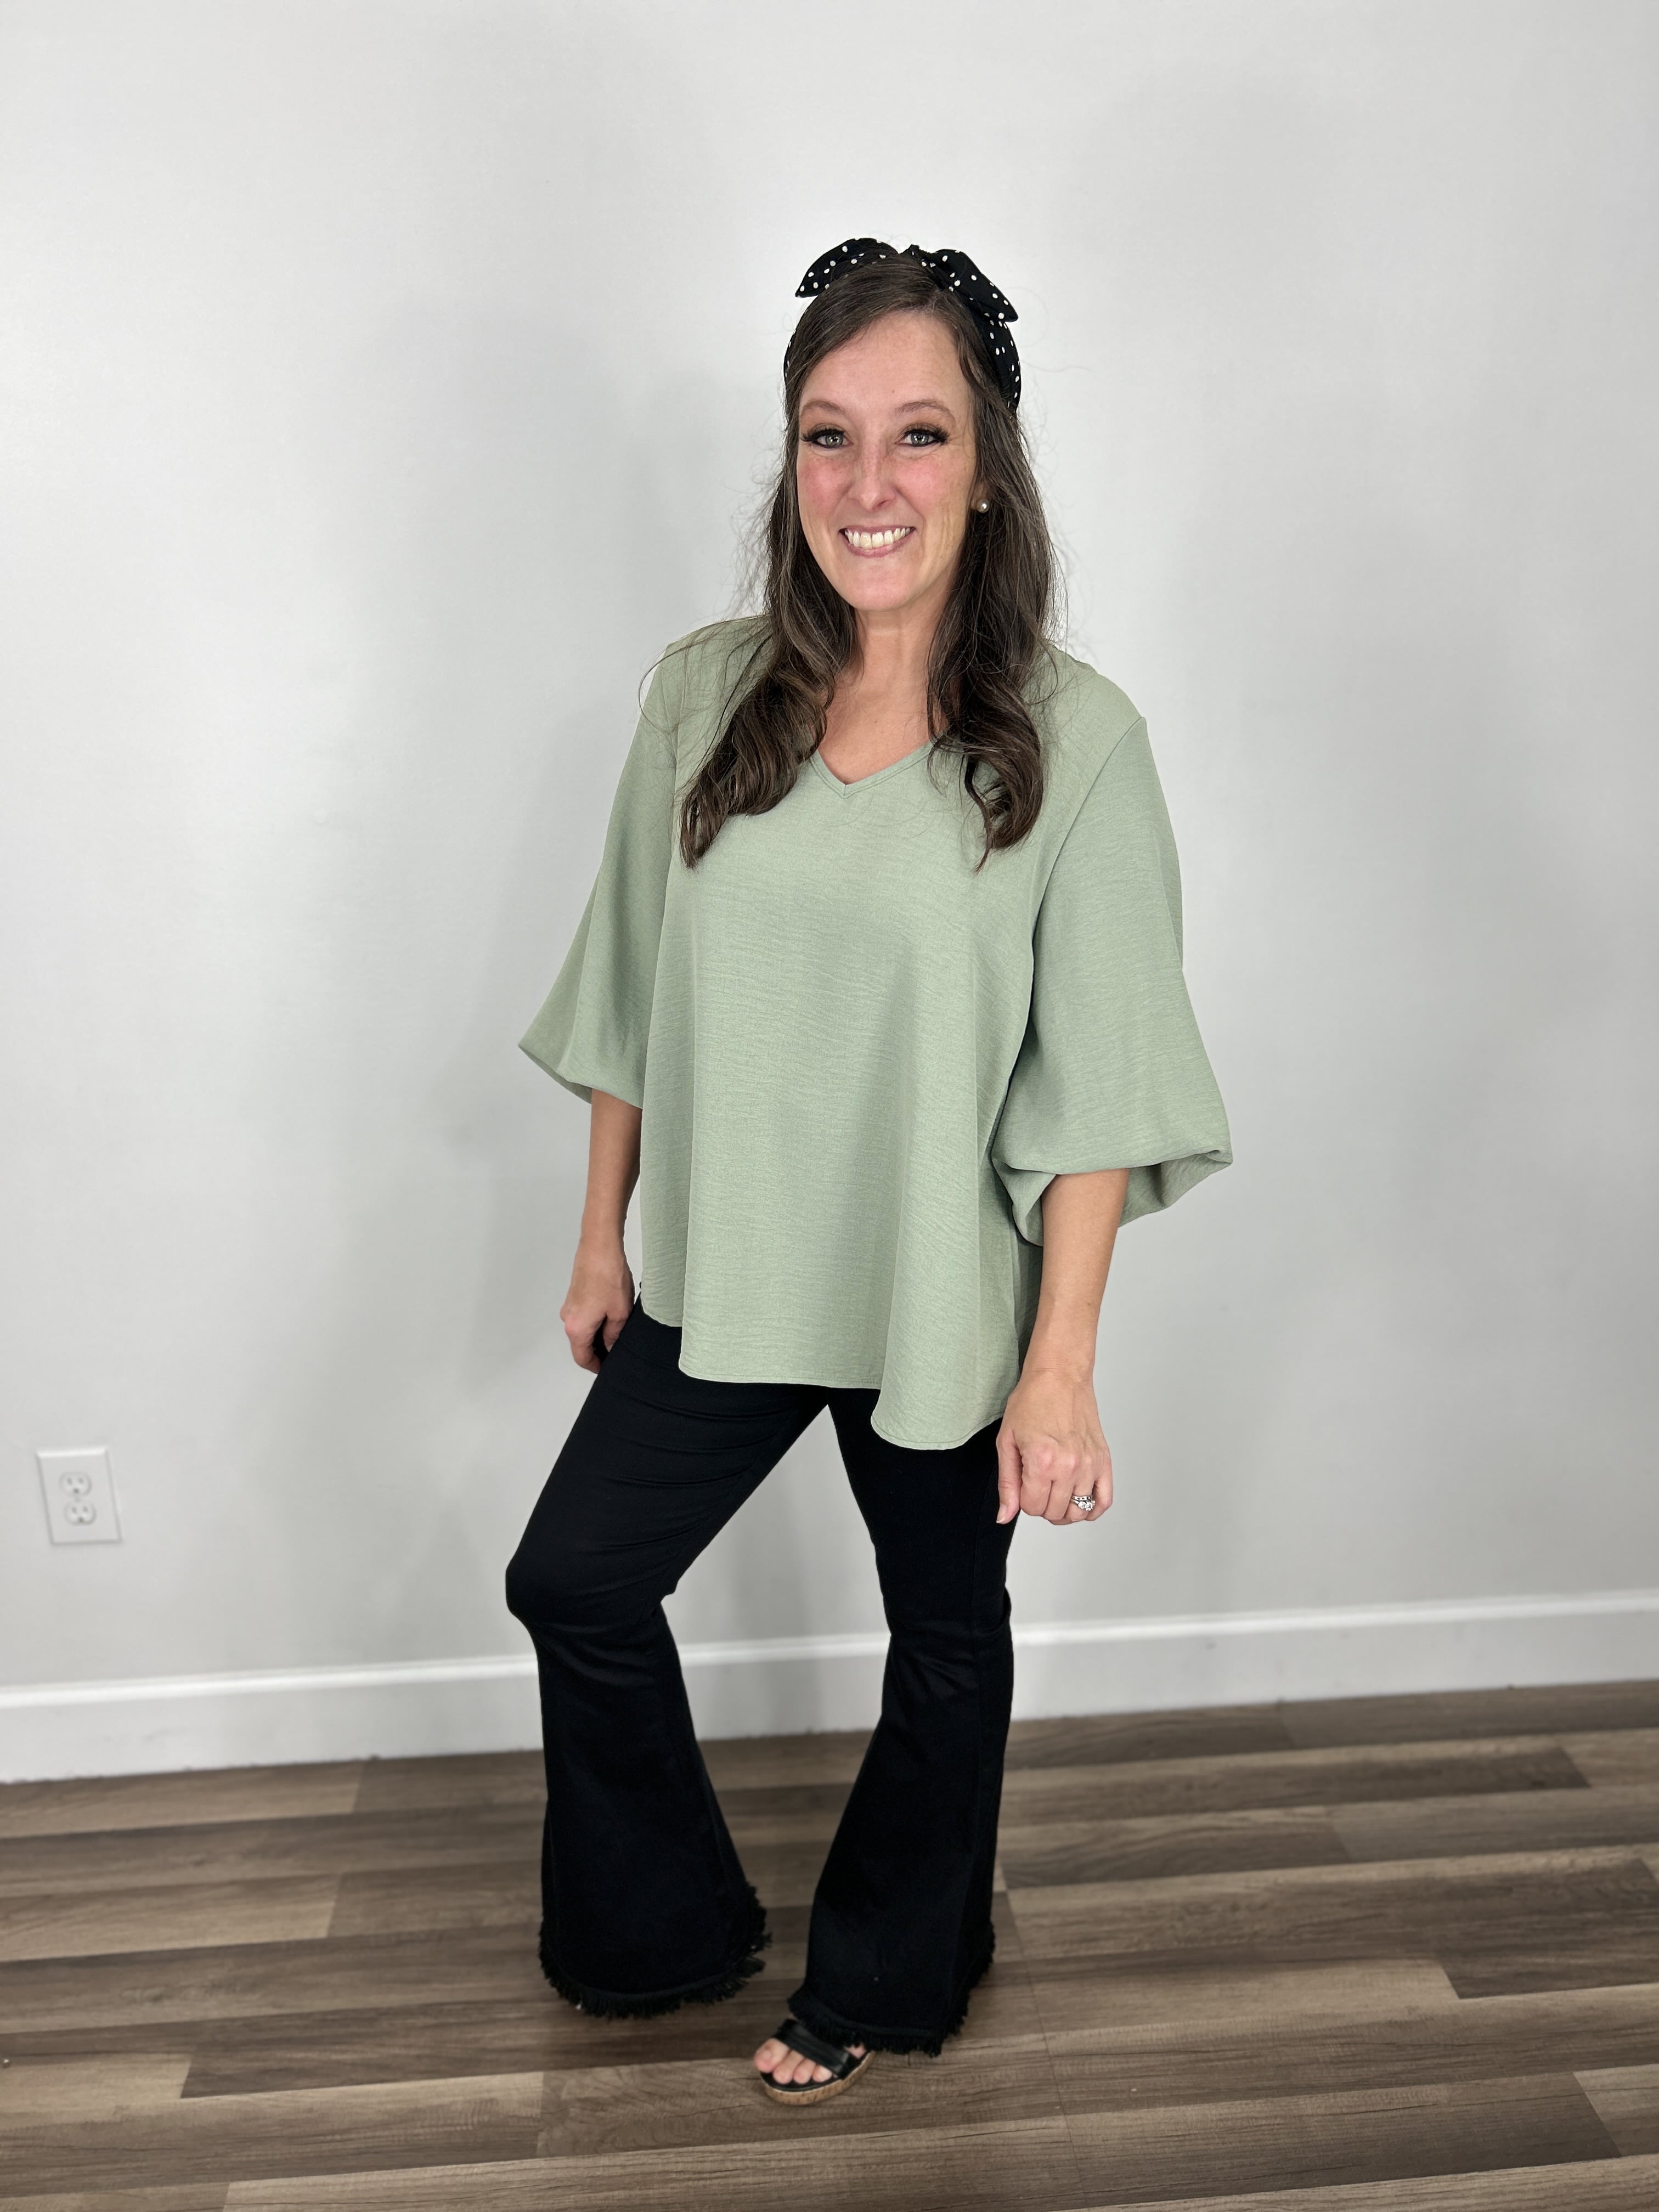 Haven Bubble Sleeve V Neck Top styled with black flare leg jeggings and black wedge sandals.